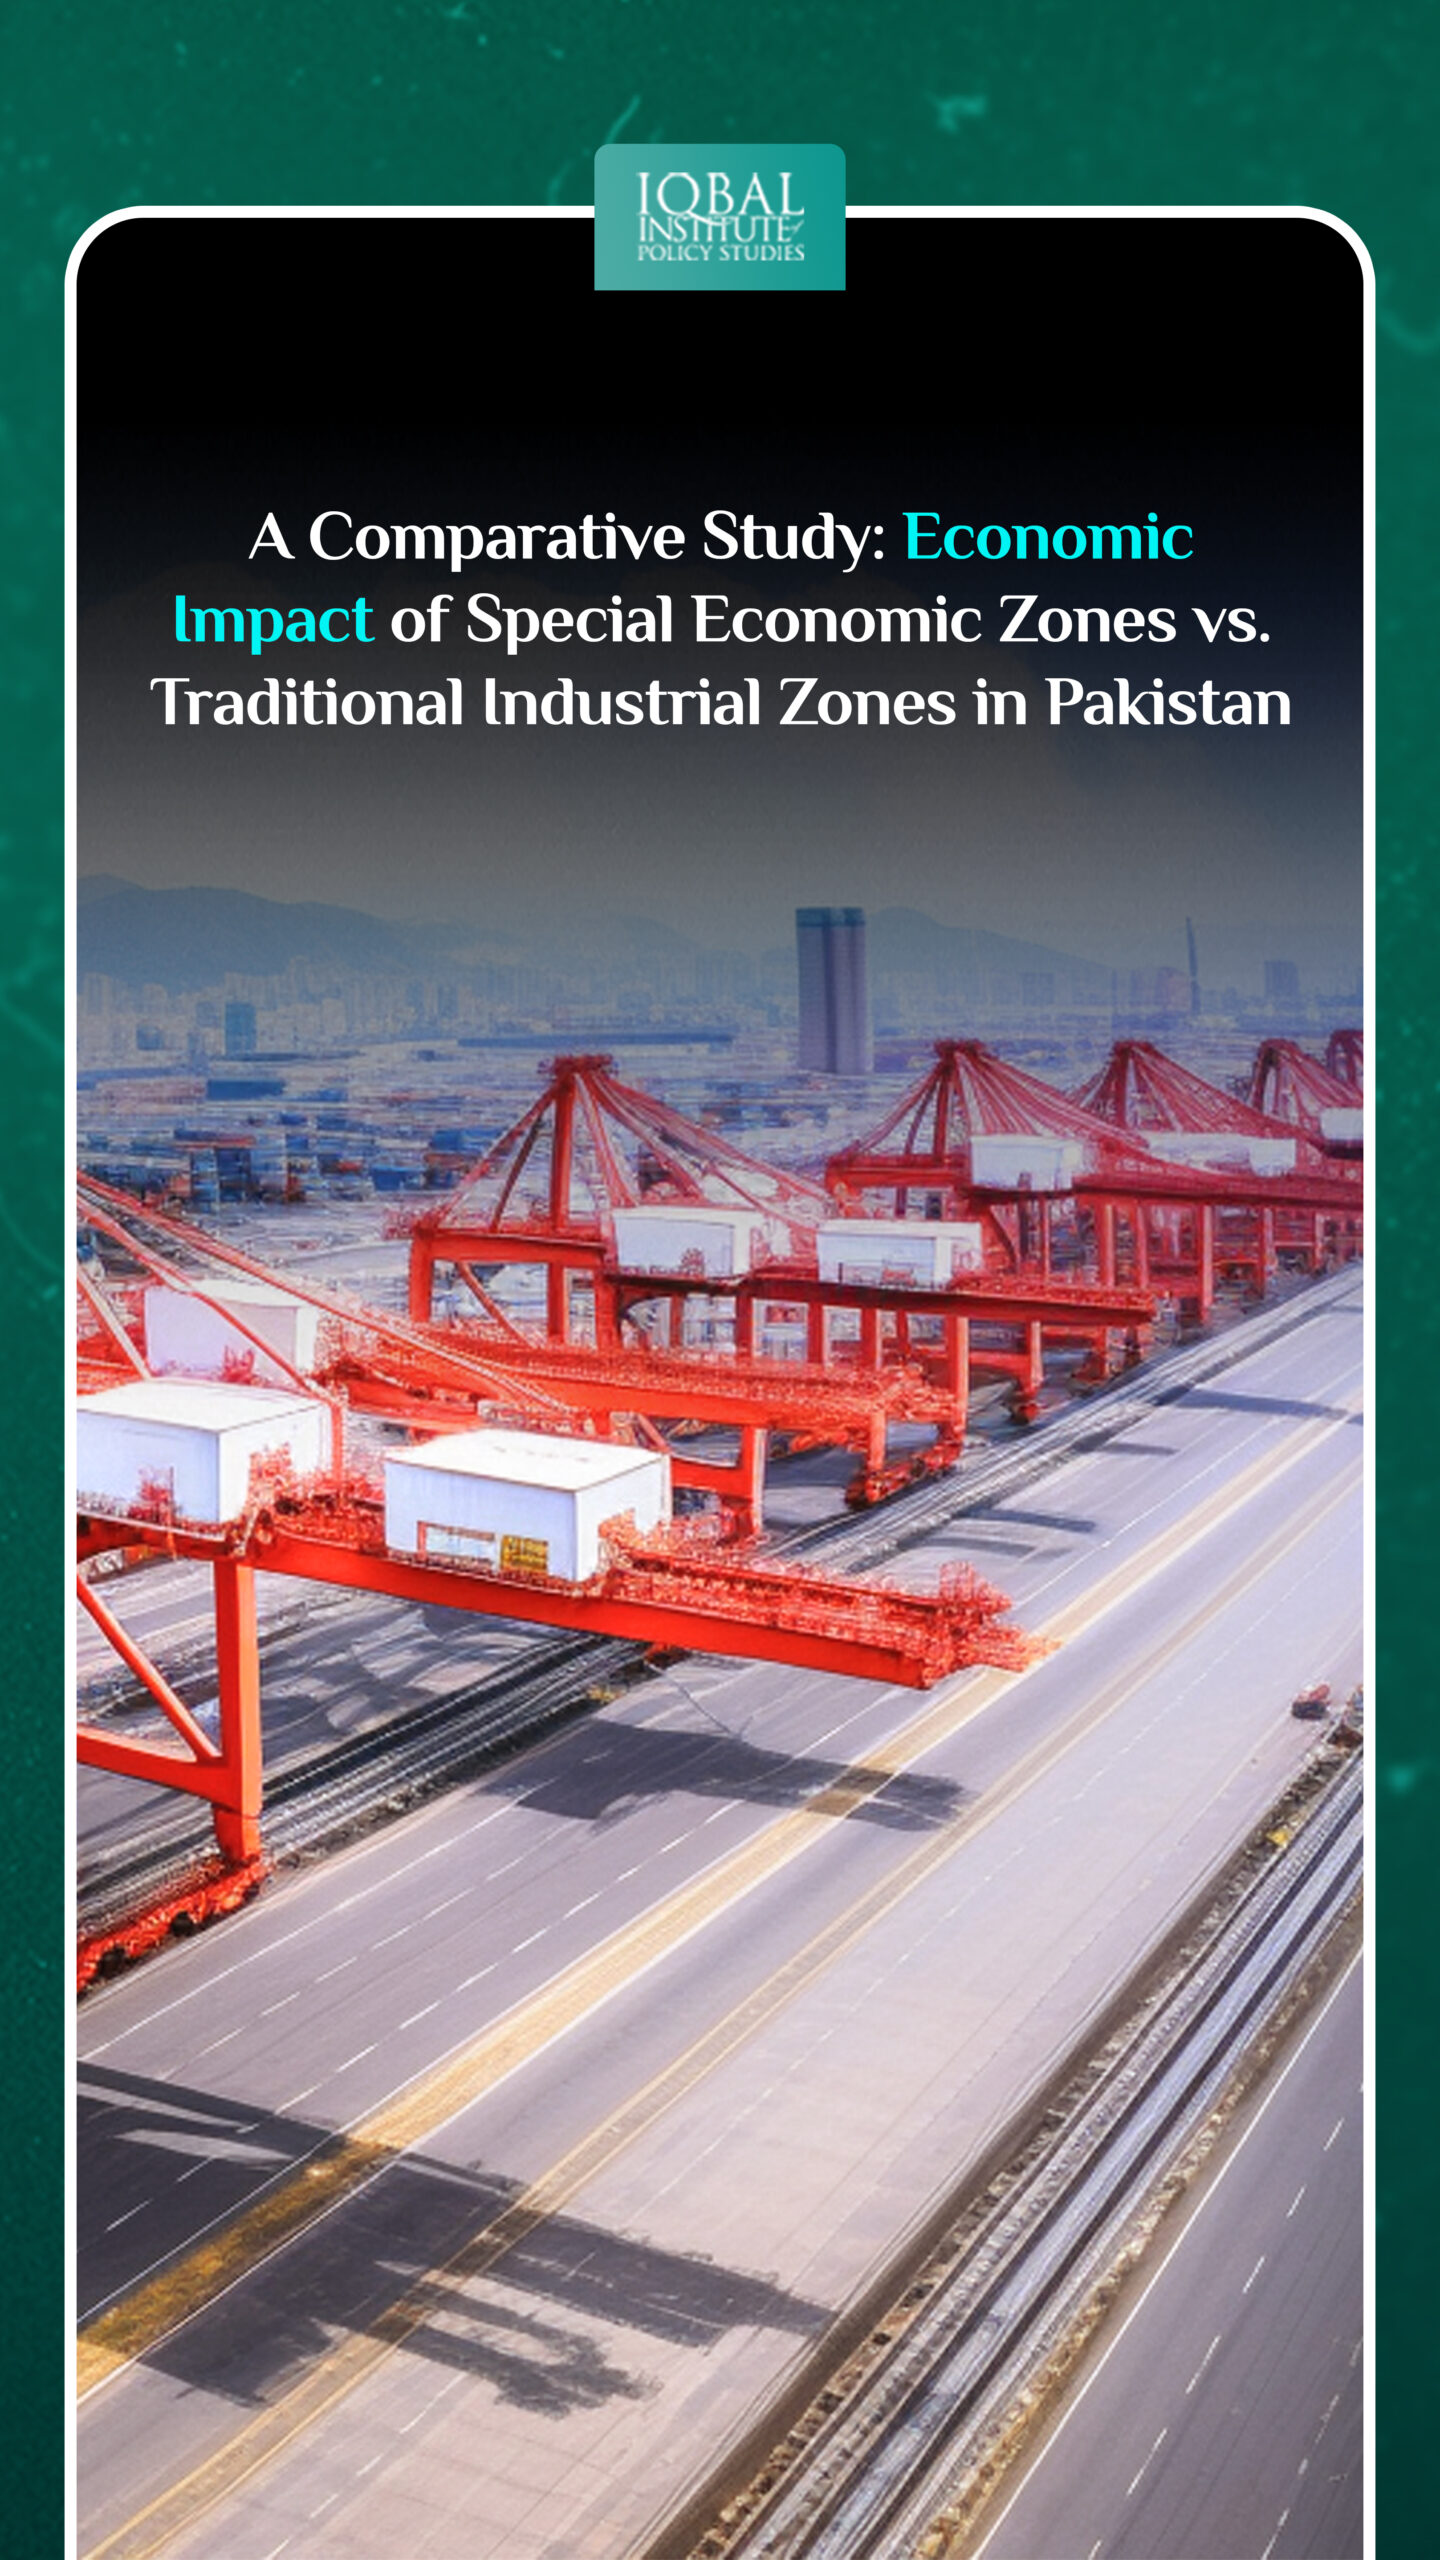 A Comparative Study: Economic Impact of Special Economic Zones vs. Traditional Industrial Zones in Pakistan